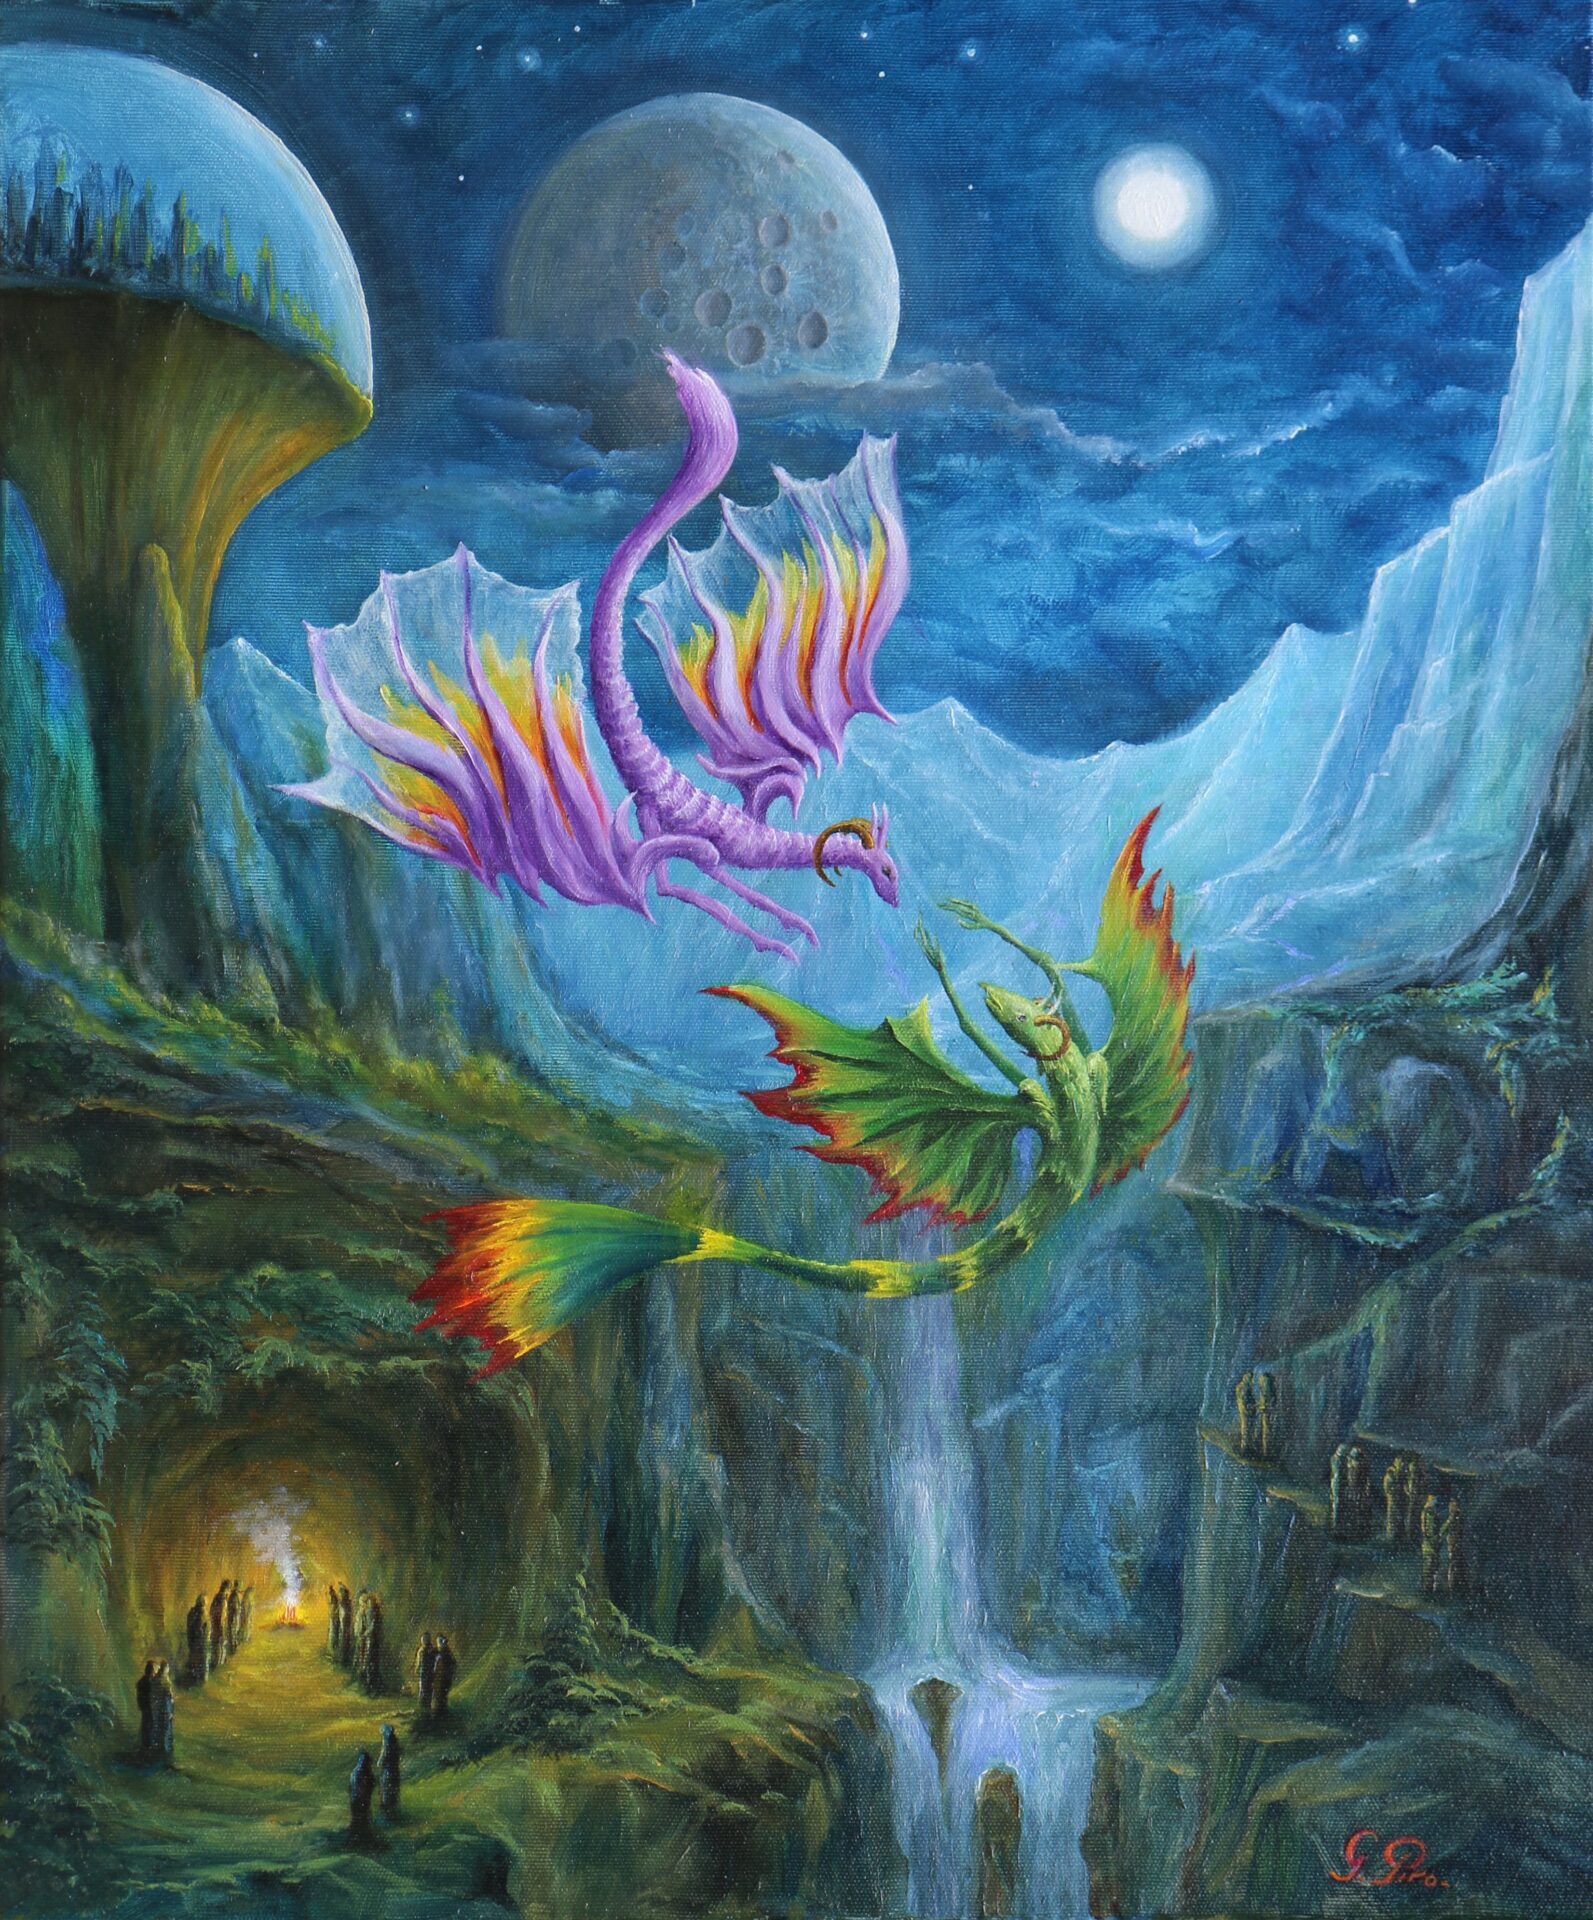 gregory pyra piro, fantasy surrealism, surrealism oil painting, surrealistic landscape, distant planet, distant solar system, night, flying dragons, dinosaurs, vibrant colors, cave, people in front of a fire, green vegetation, waterfalls, ghosts, rocks, green dragon, owl, dome city, white mountains, two moons, bright white, white light, large moon, craters